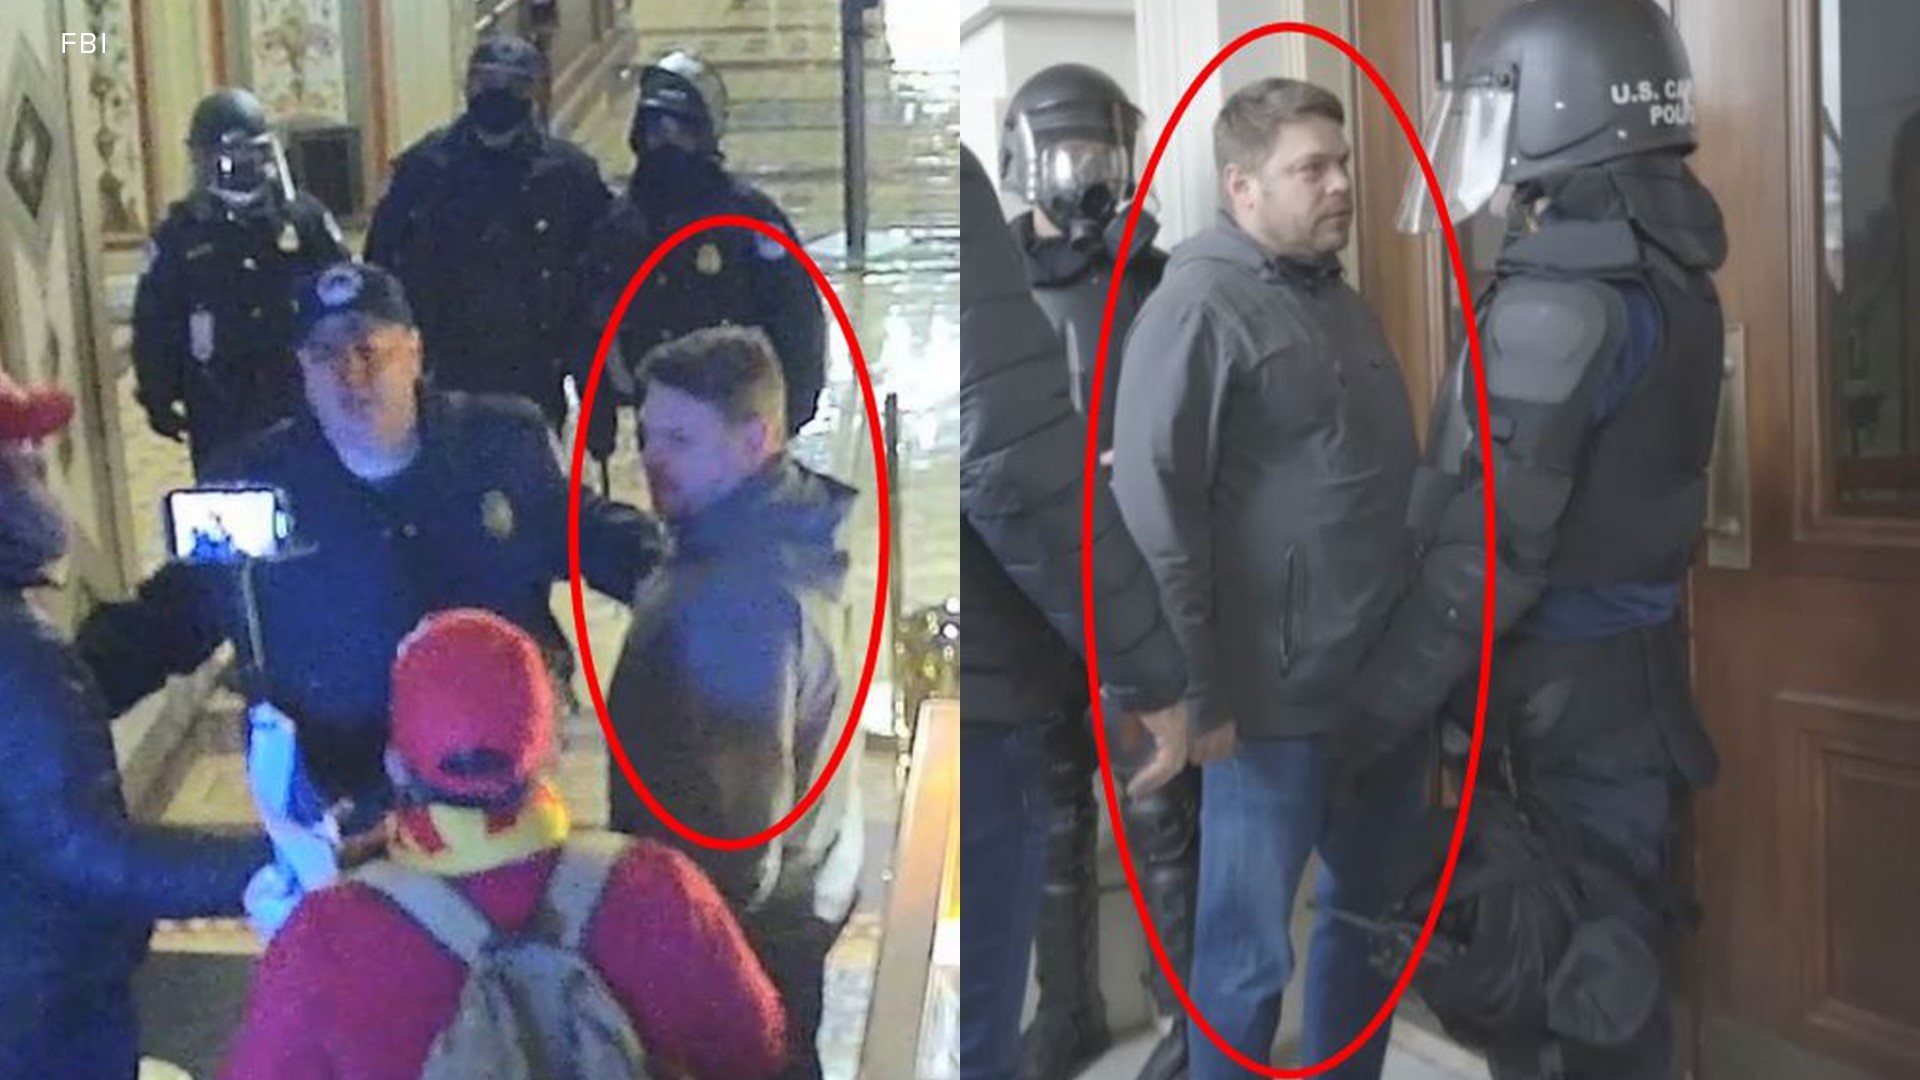 Capitol surveillance footage and videos obtained by the FBI show 41-year-old Chad Heathcote of Adel entering the U.S. Capitol along with other rioters.